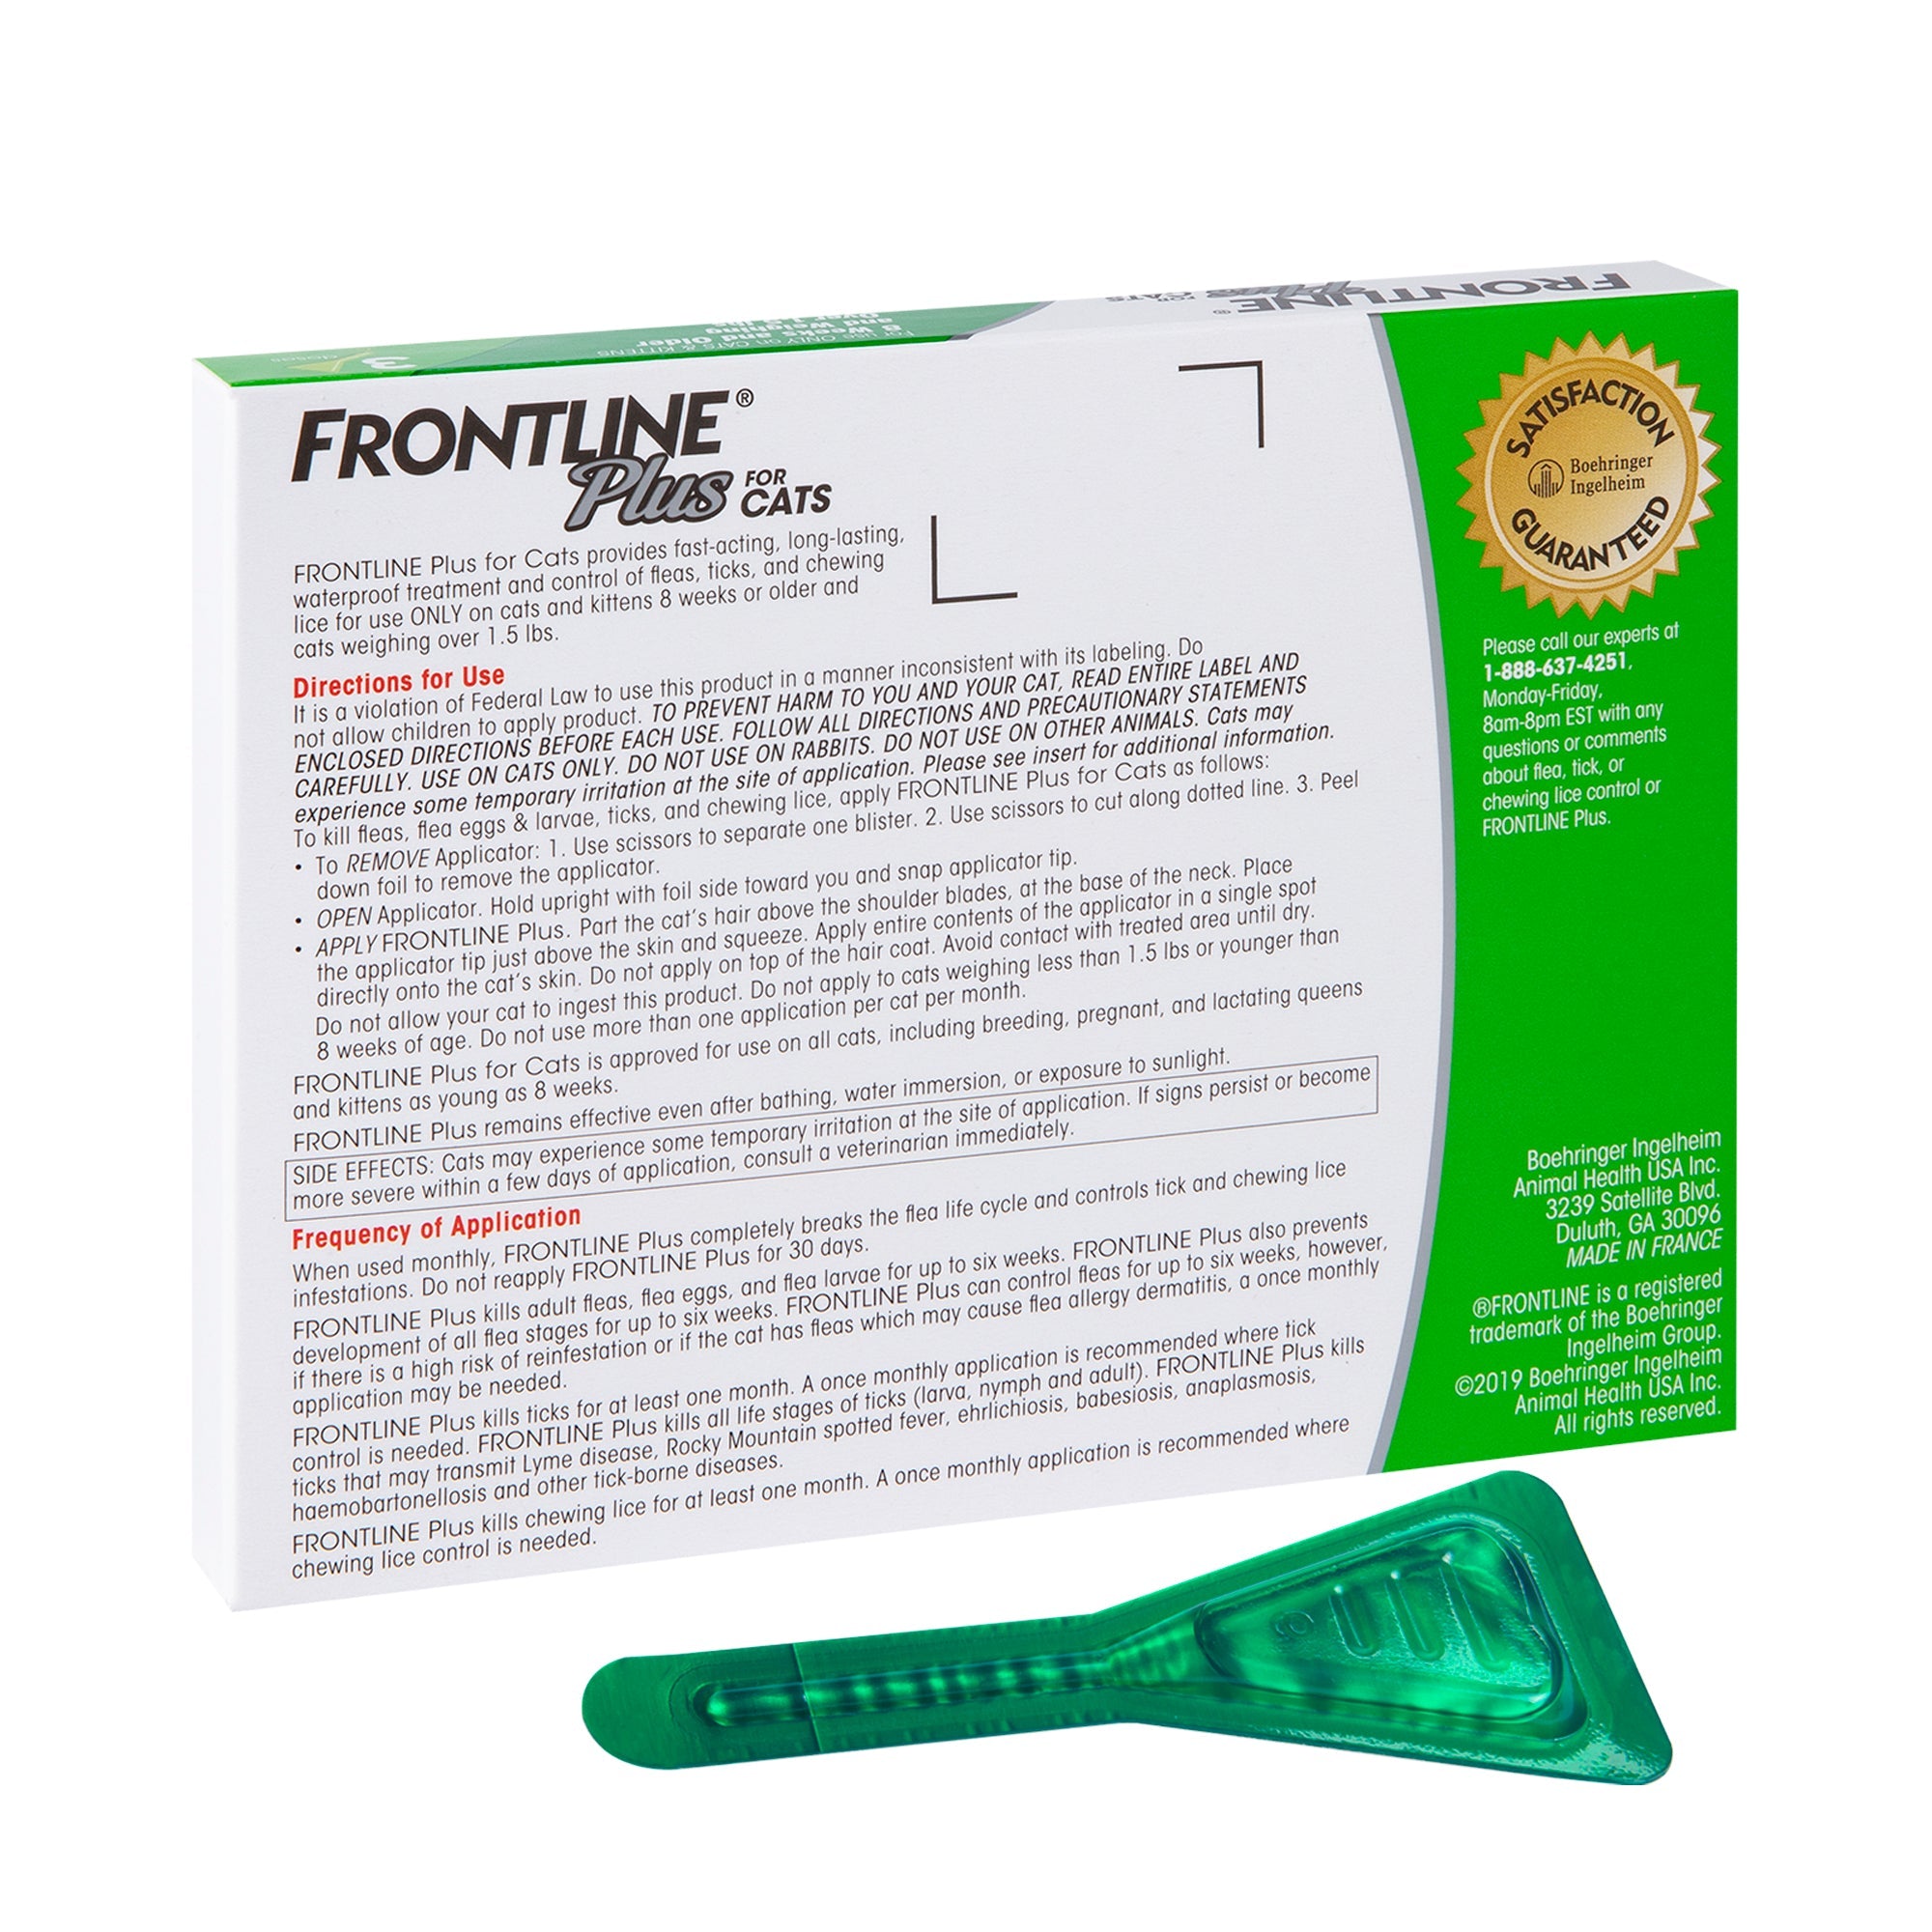 FRONTLINE Plus for Cats and Kittens (1.5 lbs and over) Flea and Tick Treatment, 6 Doses